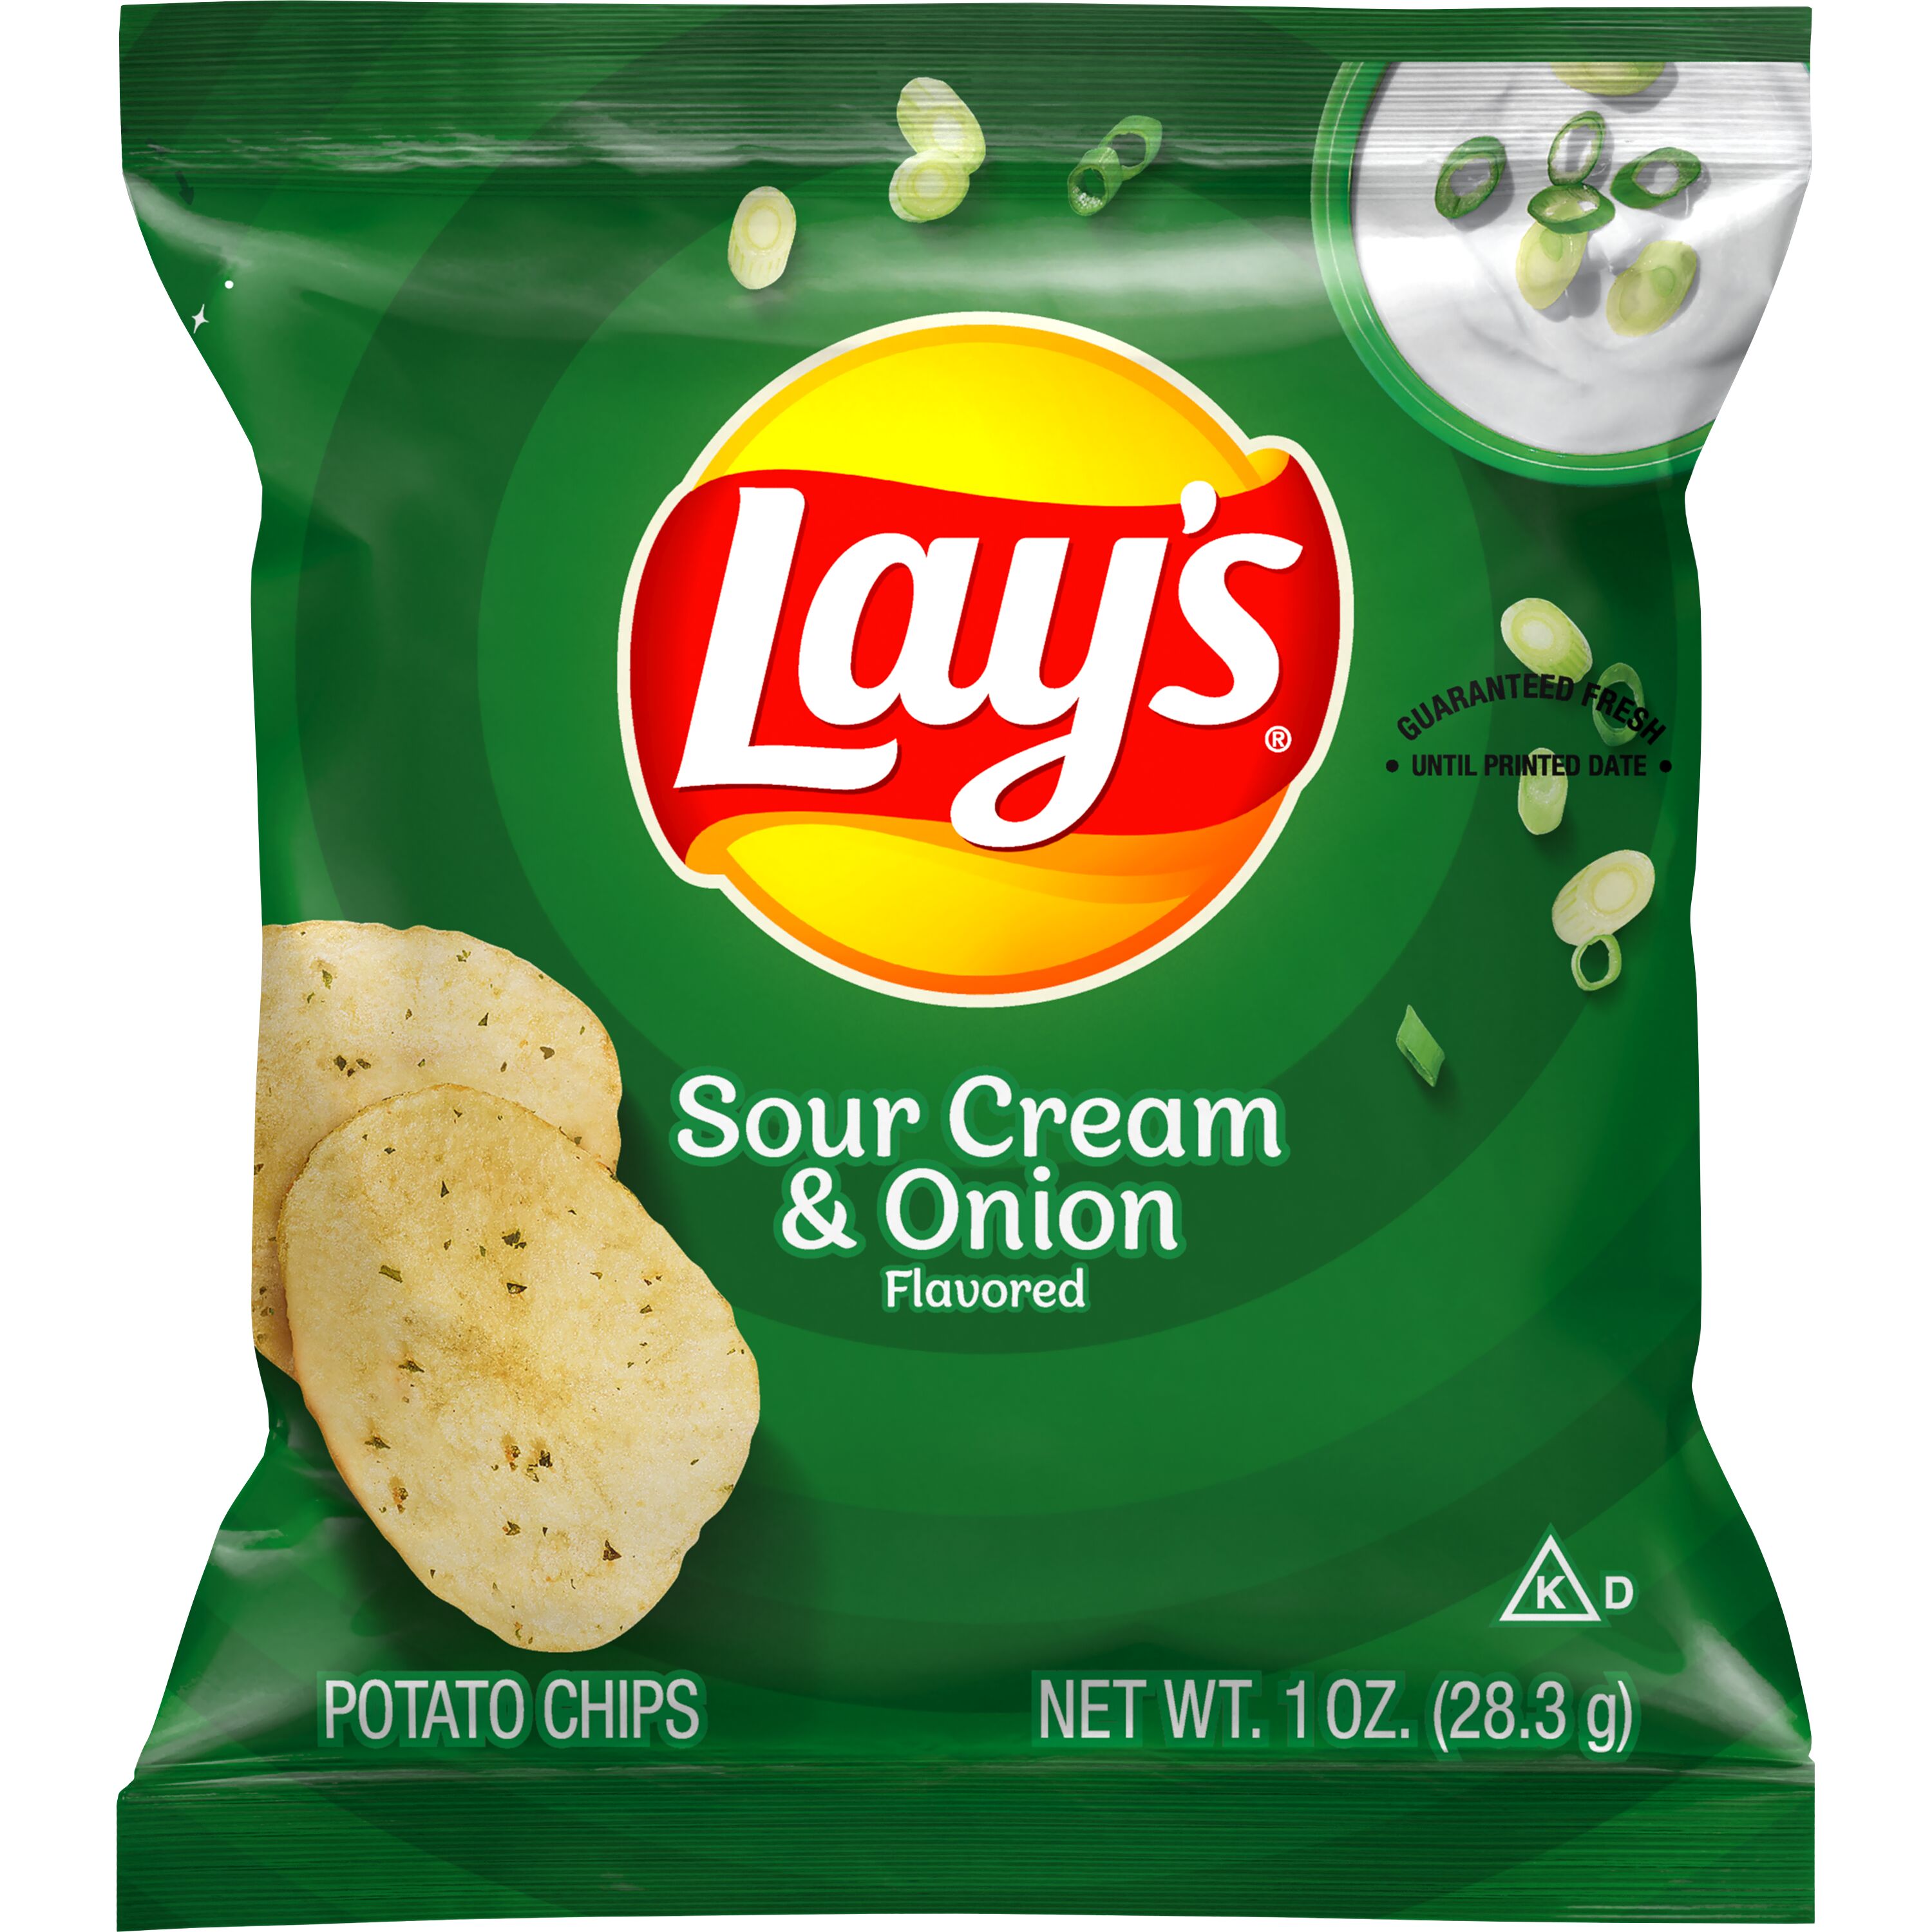 Lay's Potato Chips Variety Pack Snack Chips, 1oz Bags, 40 Count Multipack - image 2 of 11